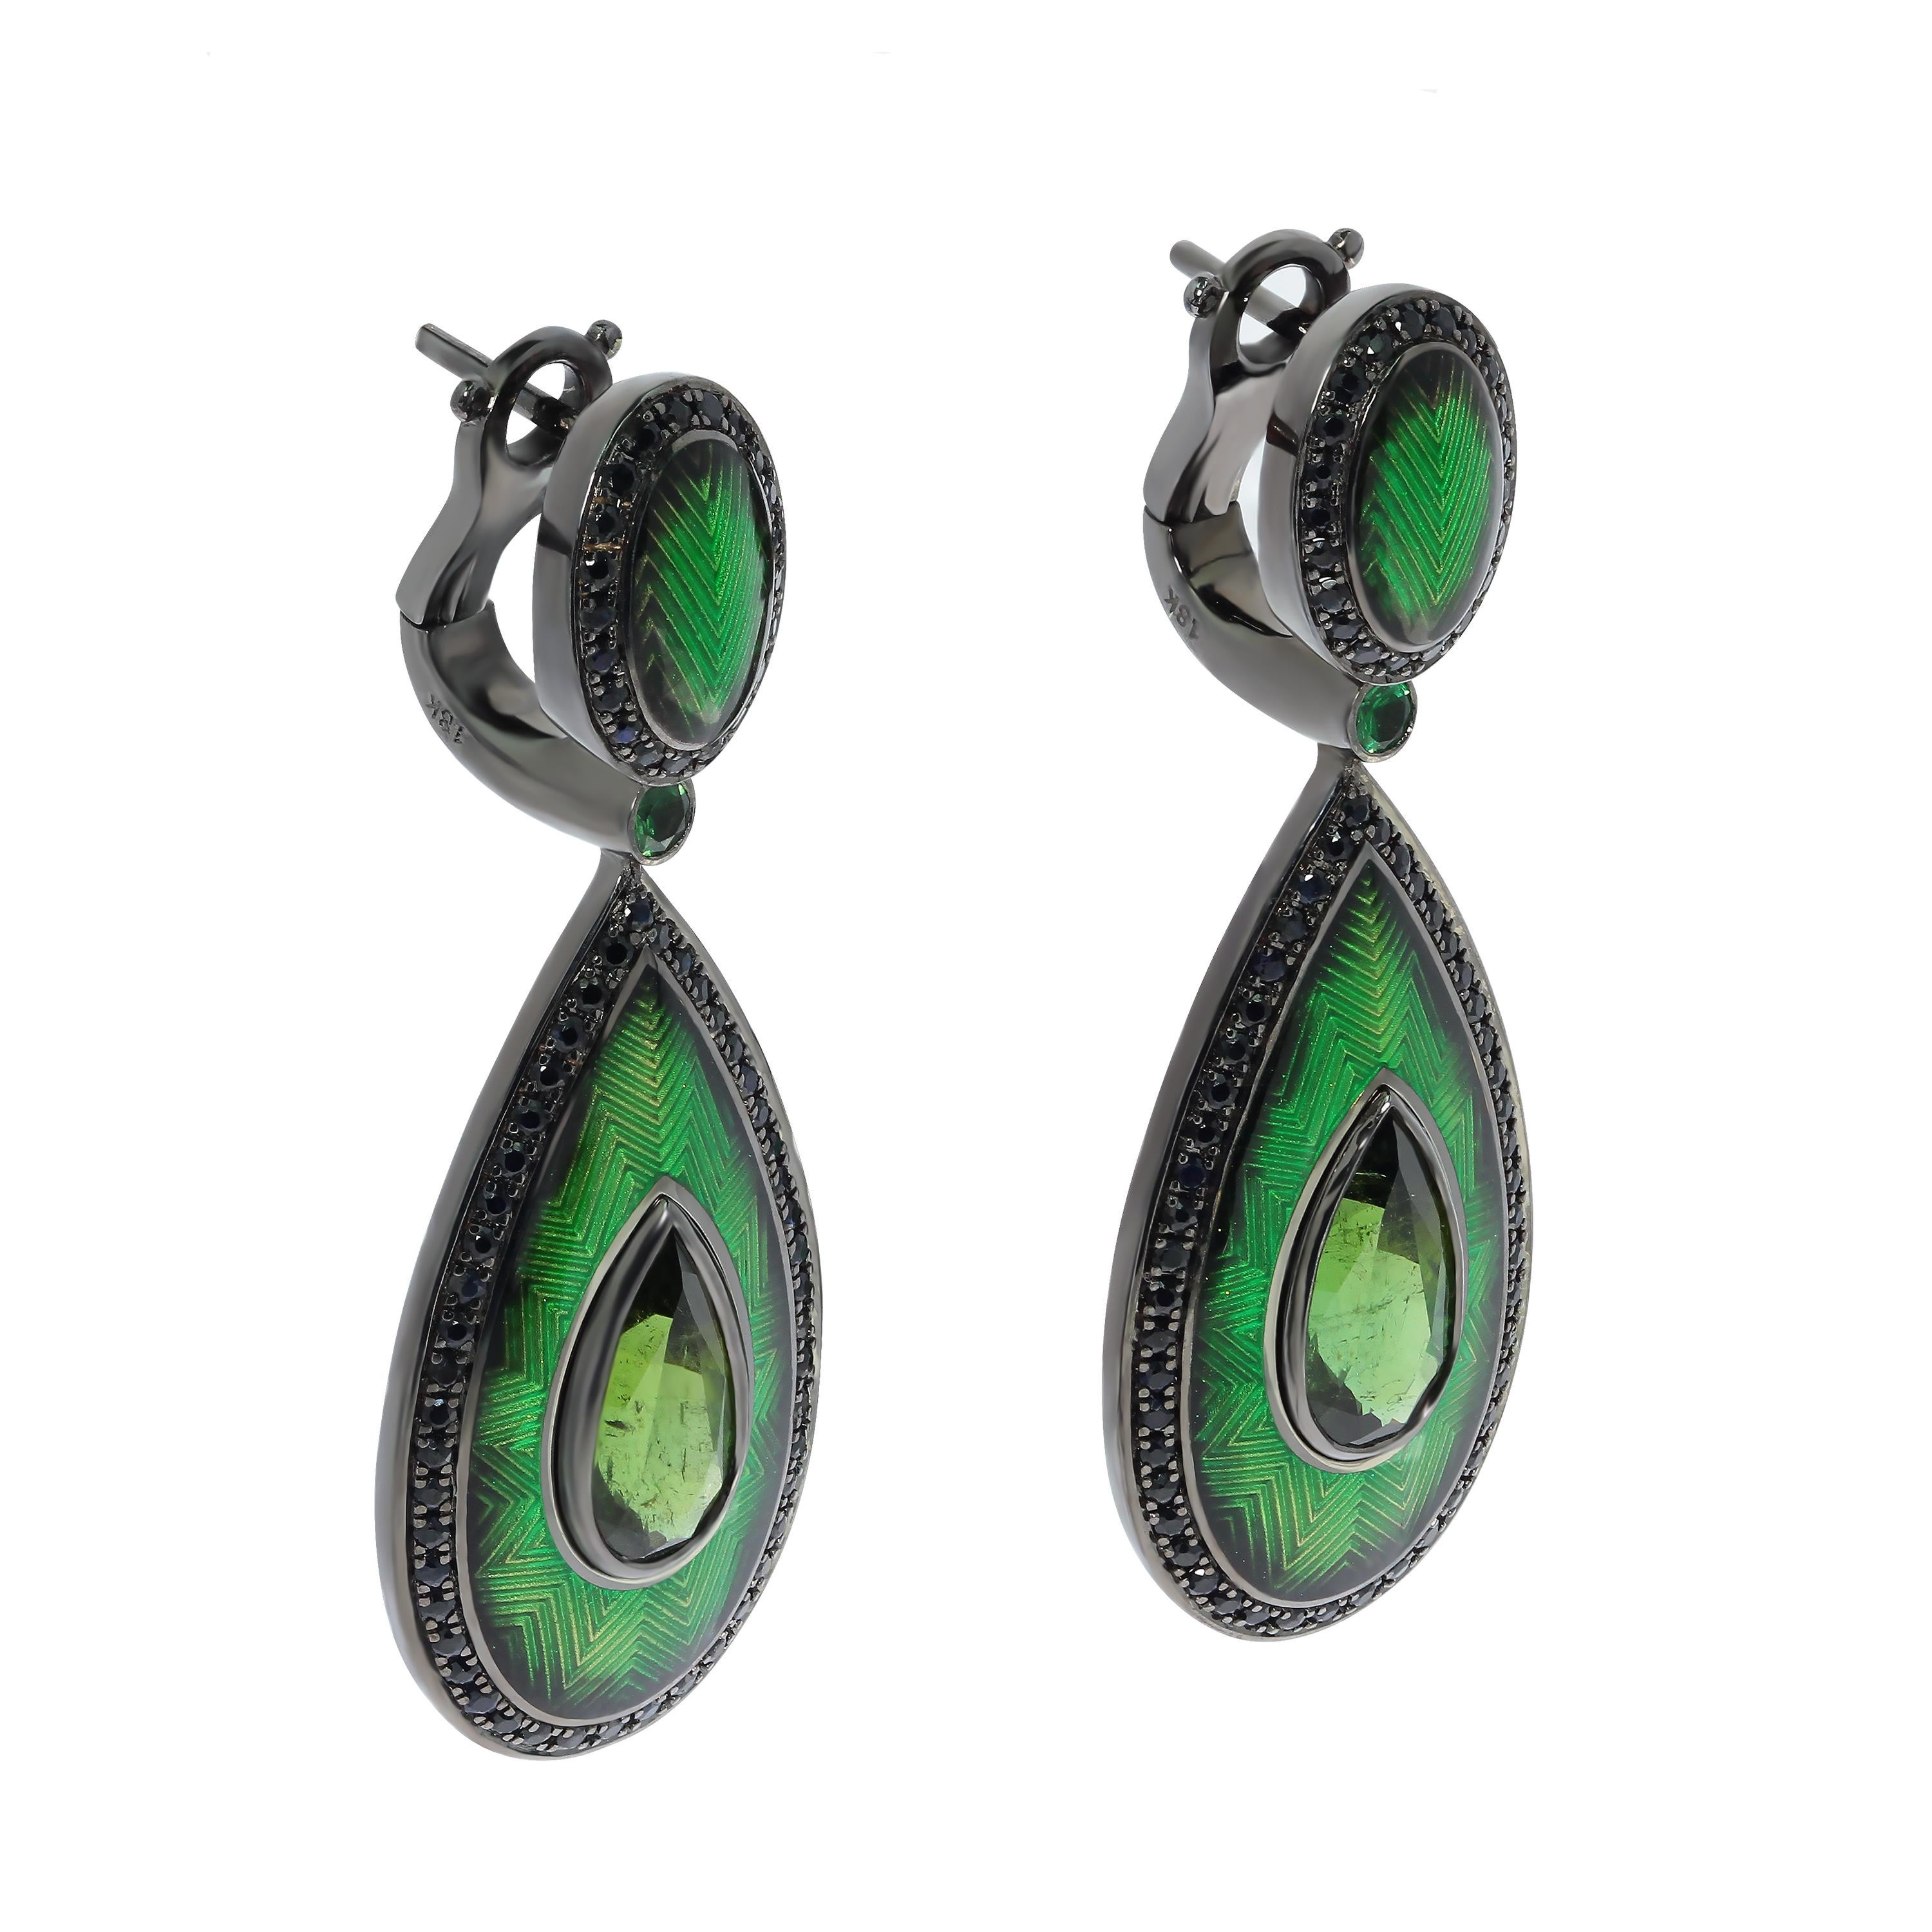 Green Tourmaline 3.64 Carat Black Sapphire 18 Karat Black Gold Enamel Earrings
We present you Earrings from our signature collection 